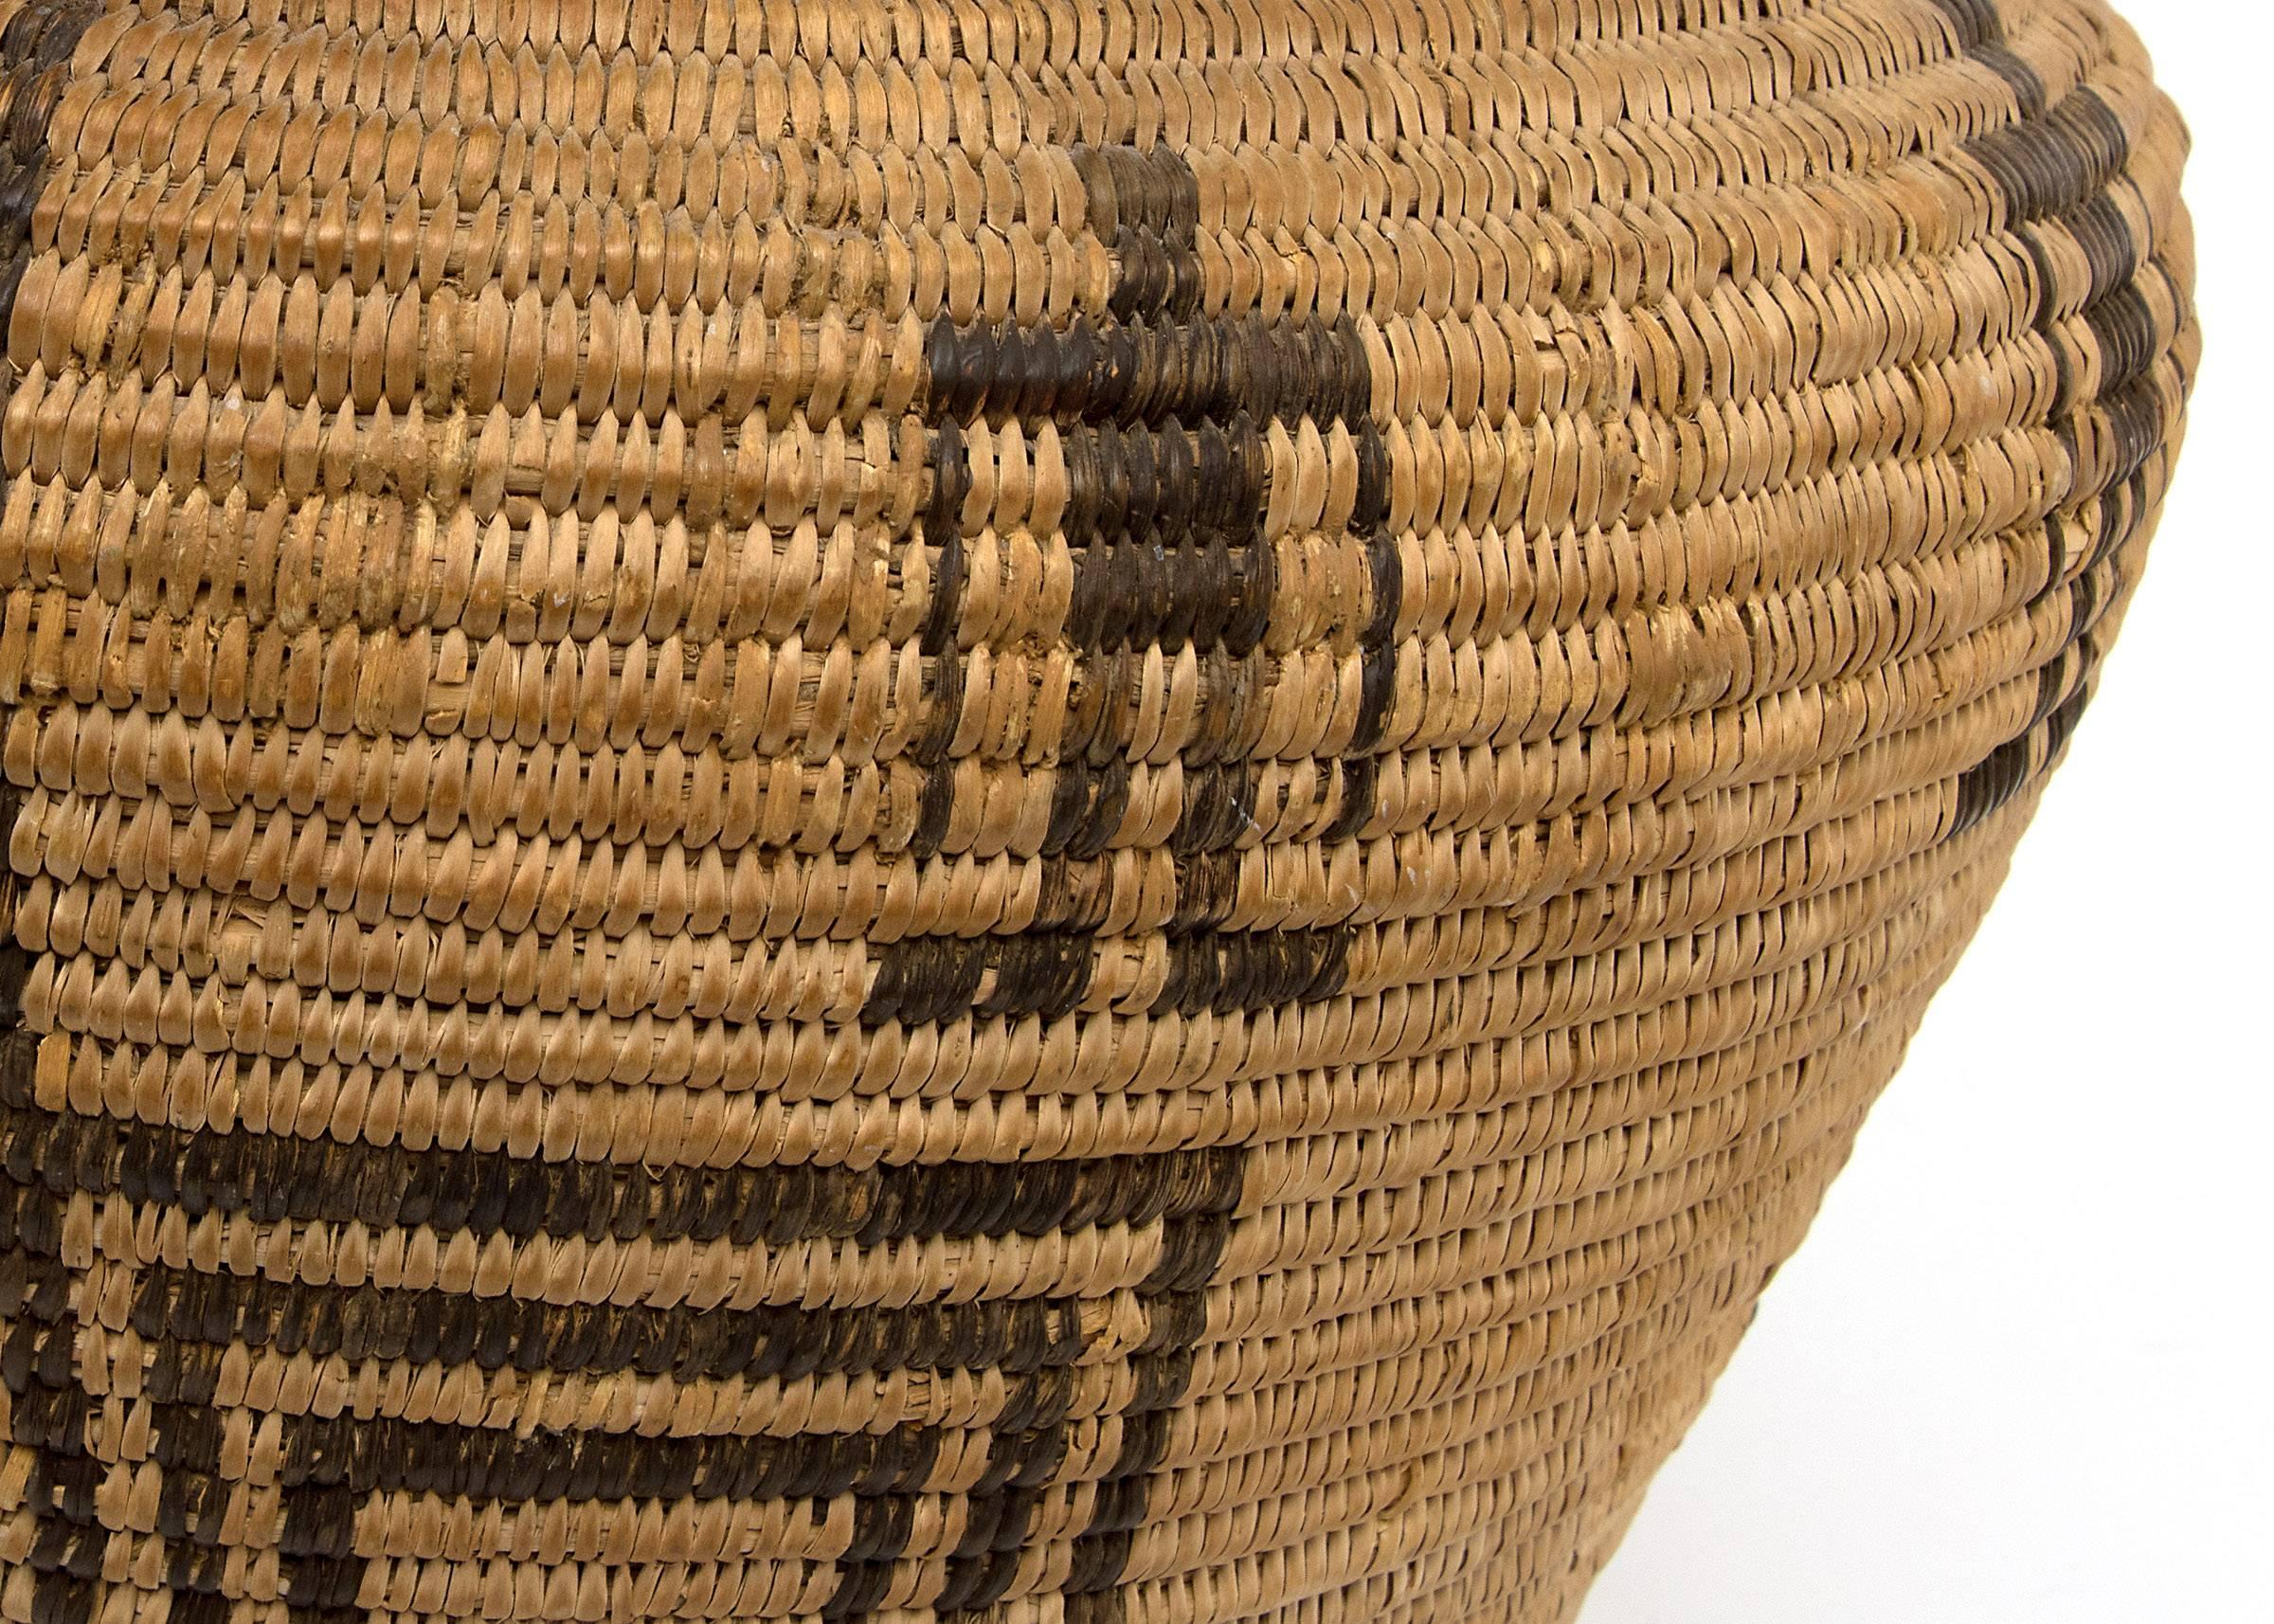 woven indian baskets